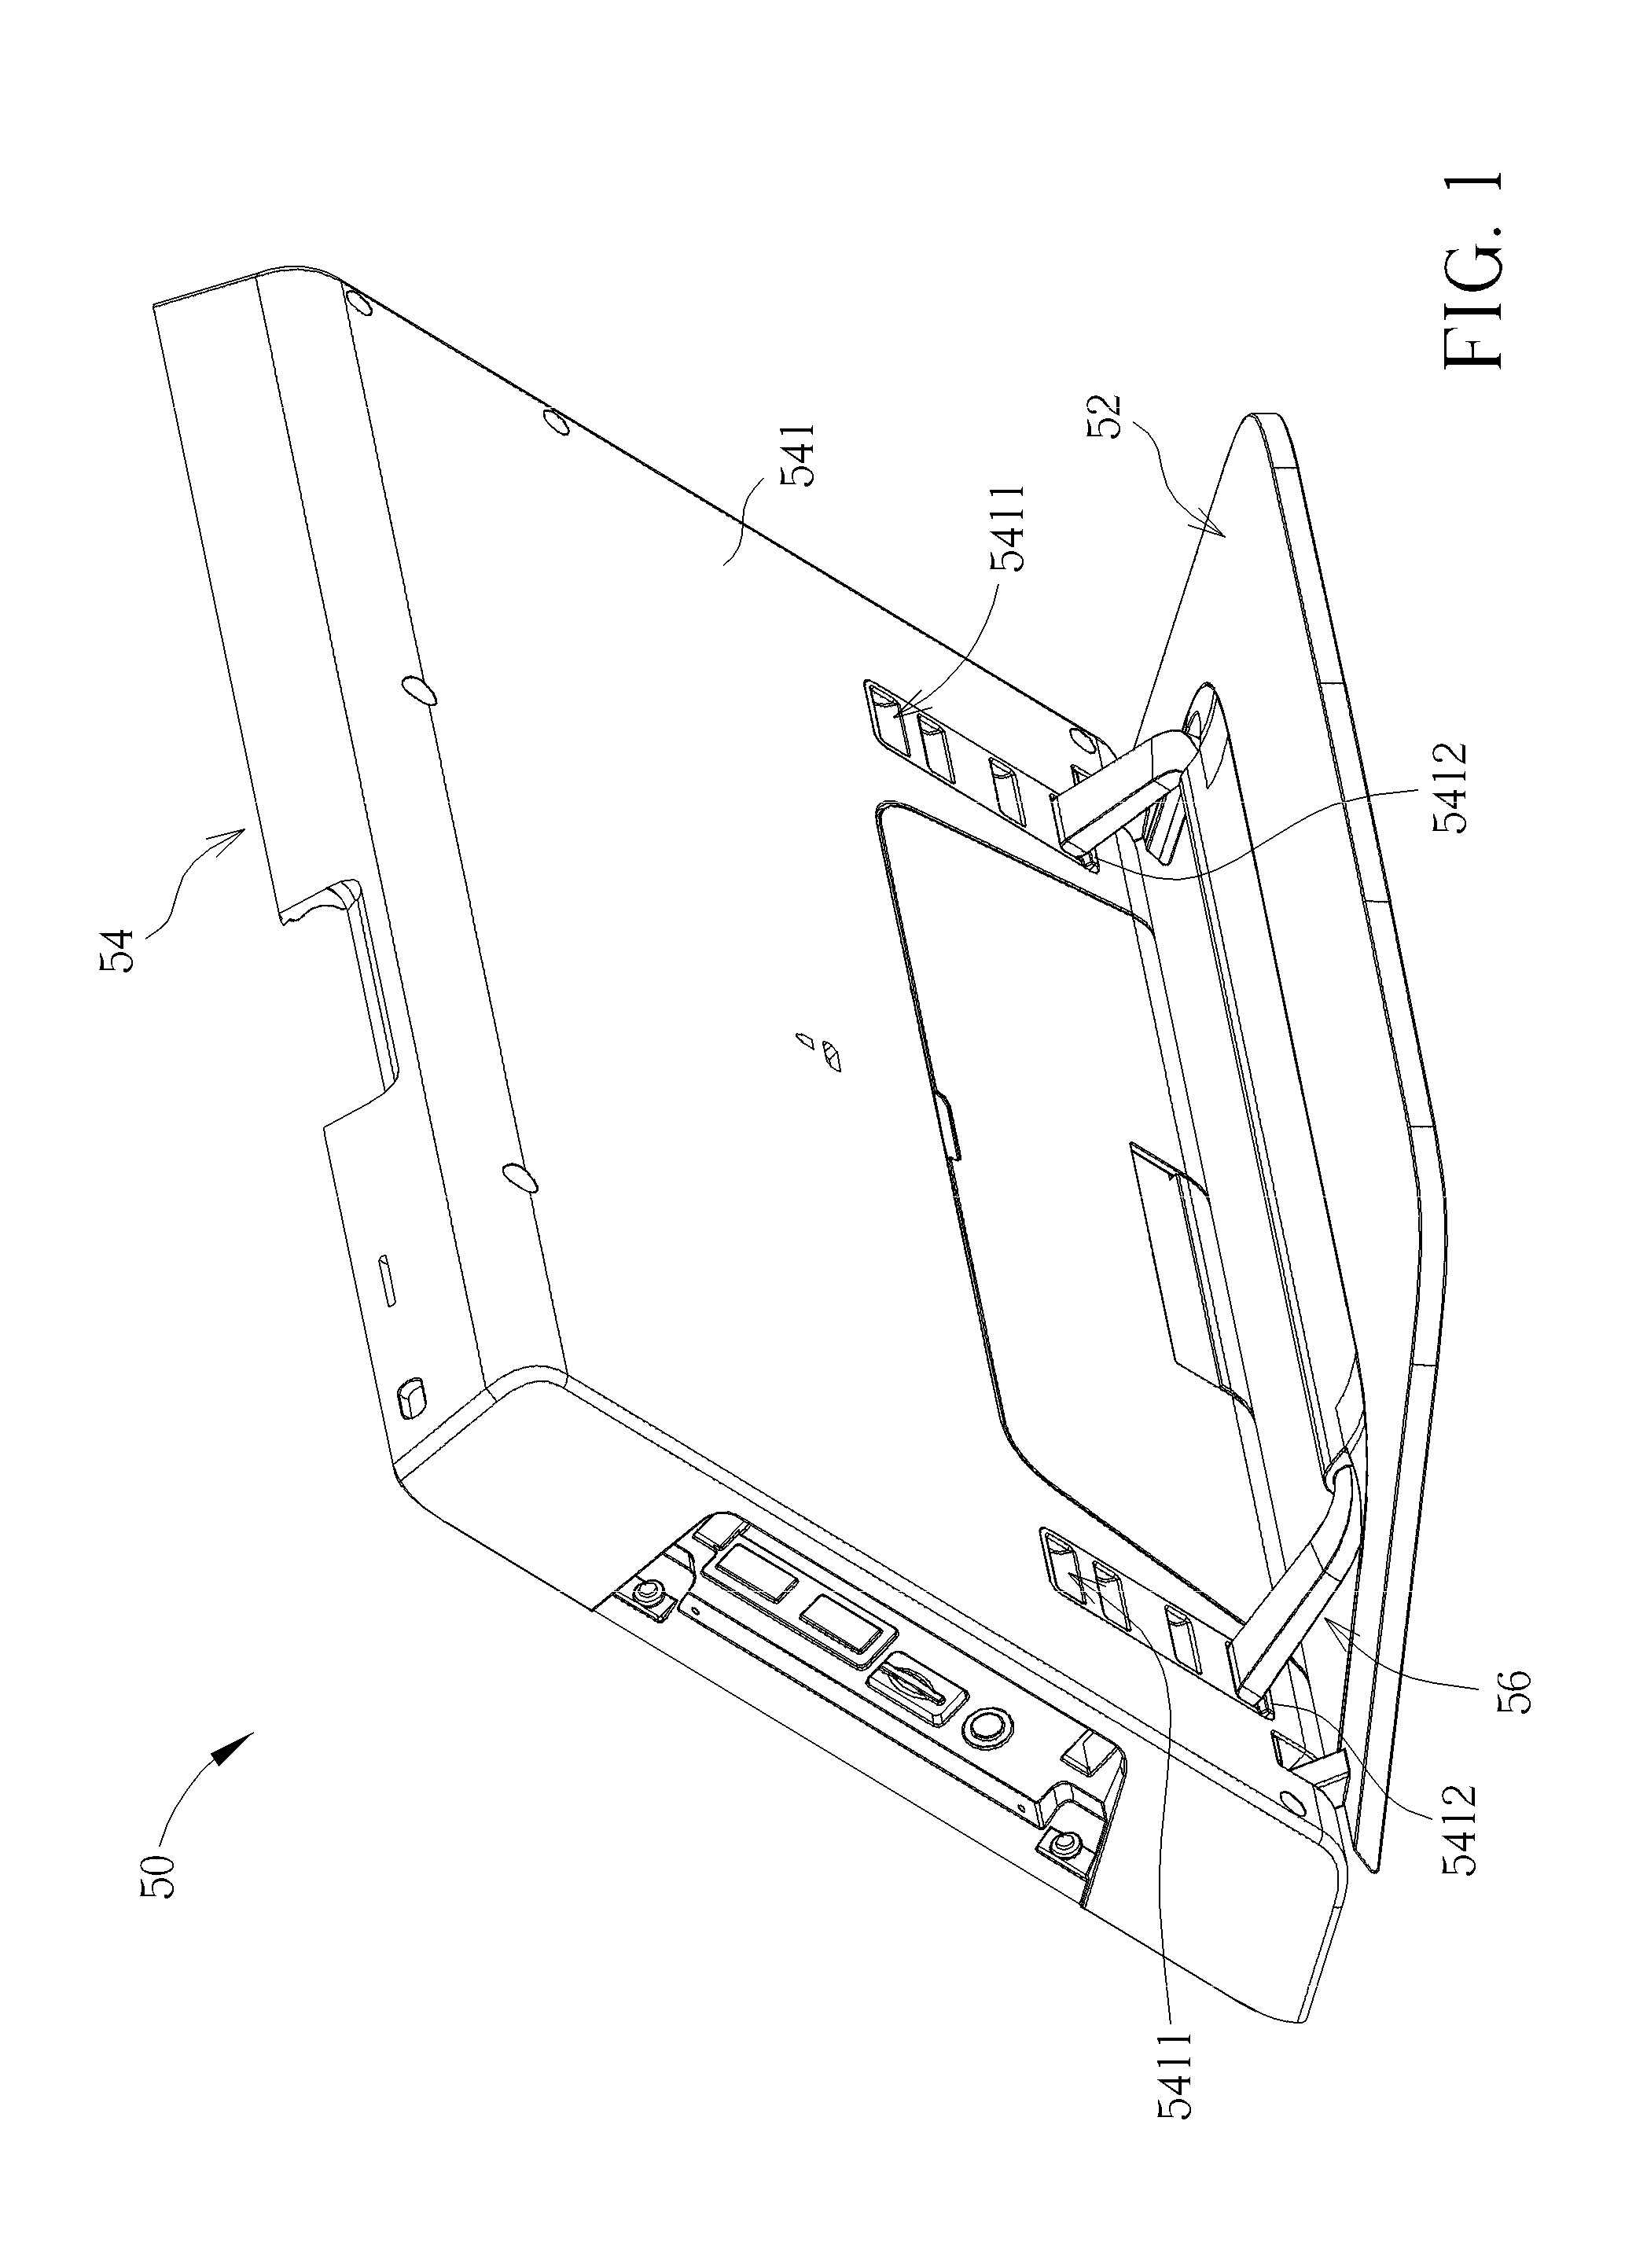 Display device capable of fixing a screen at different view angles